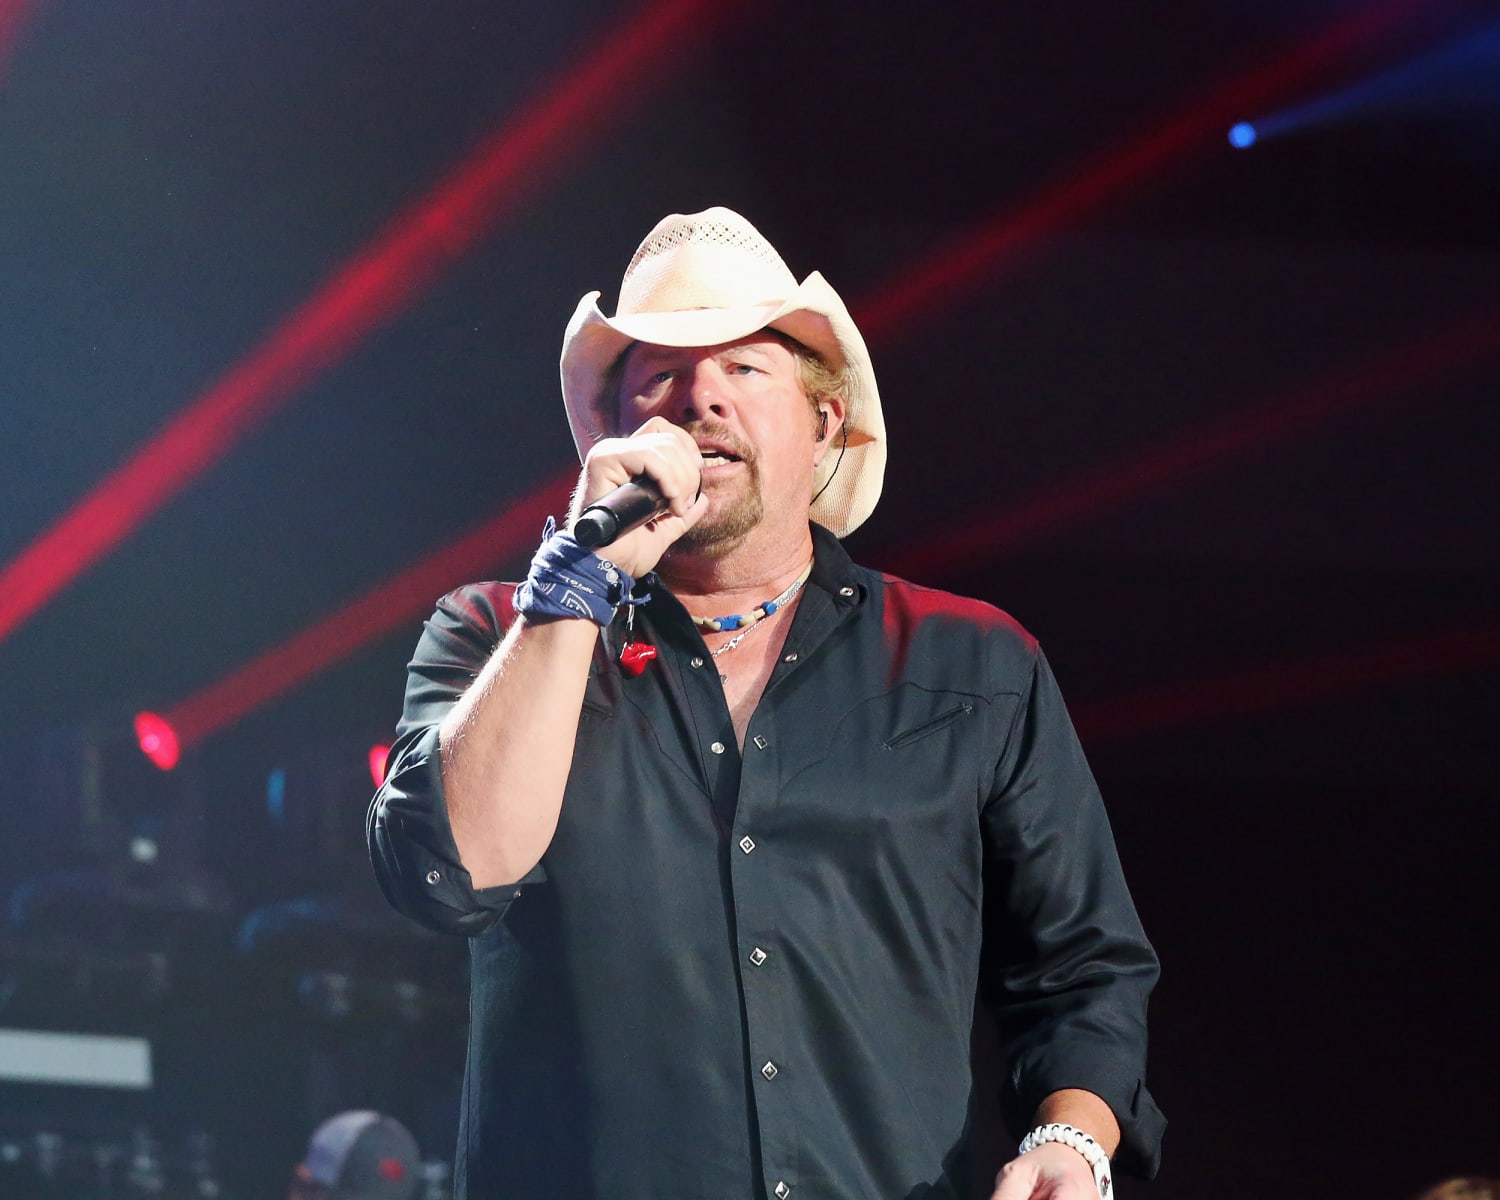 Toby Keith's Net Worth - Singer Reveals About His Stomach Cancer